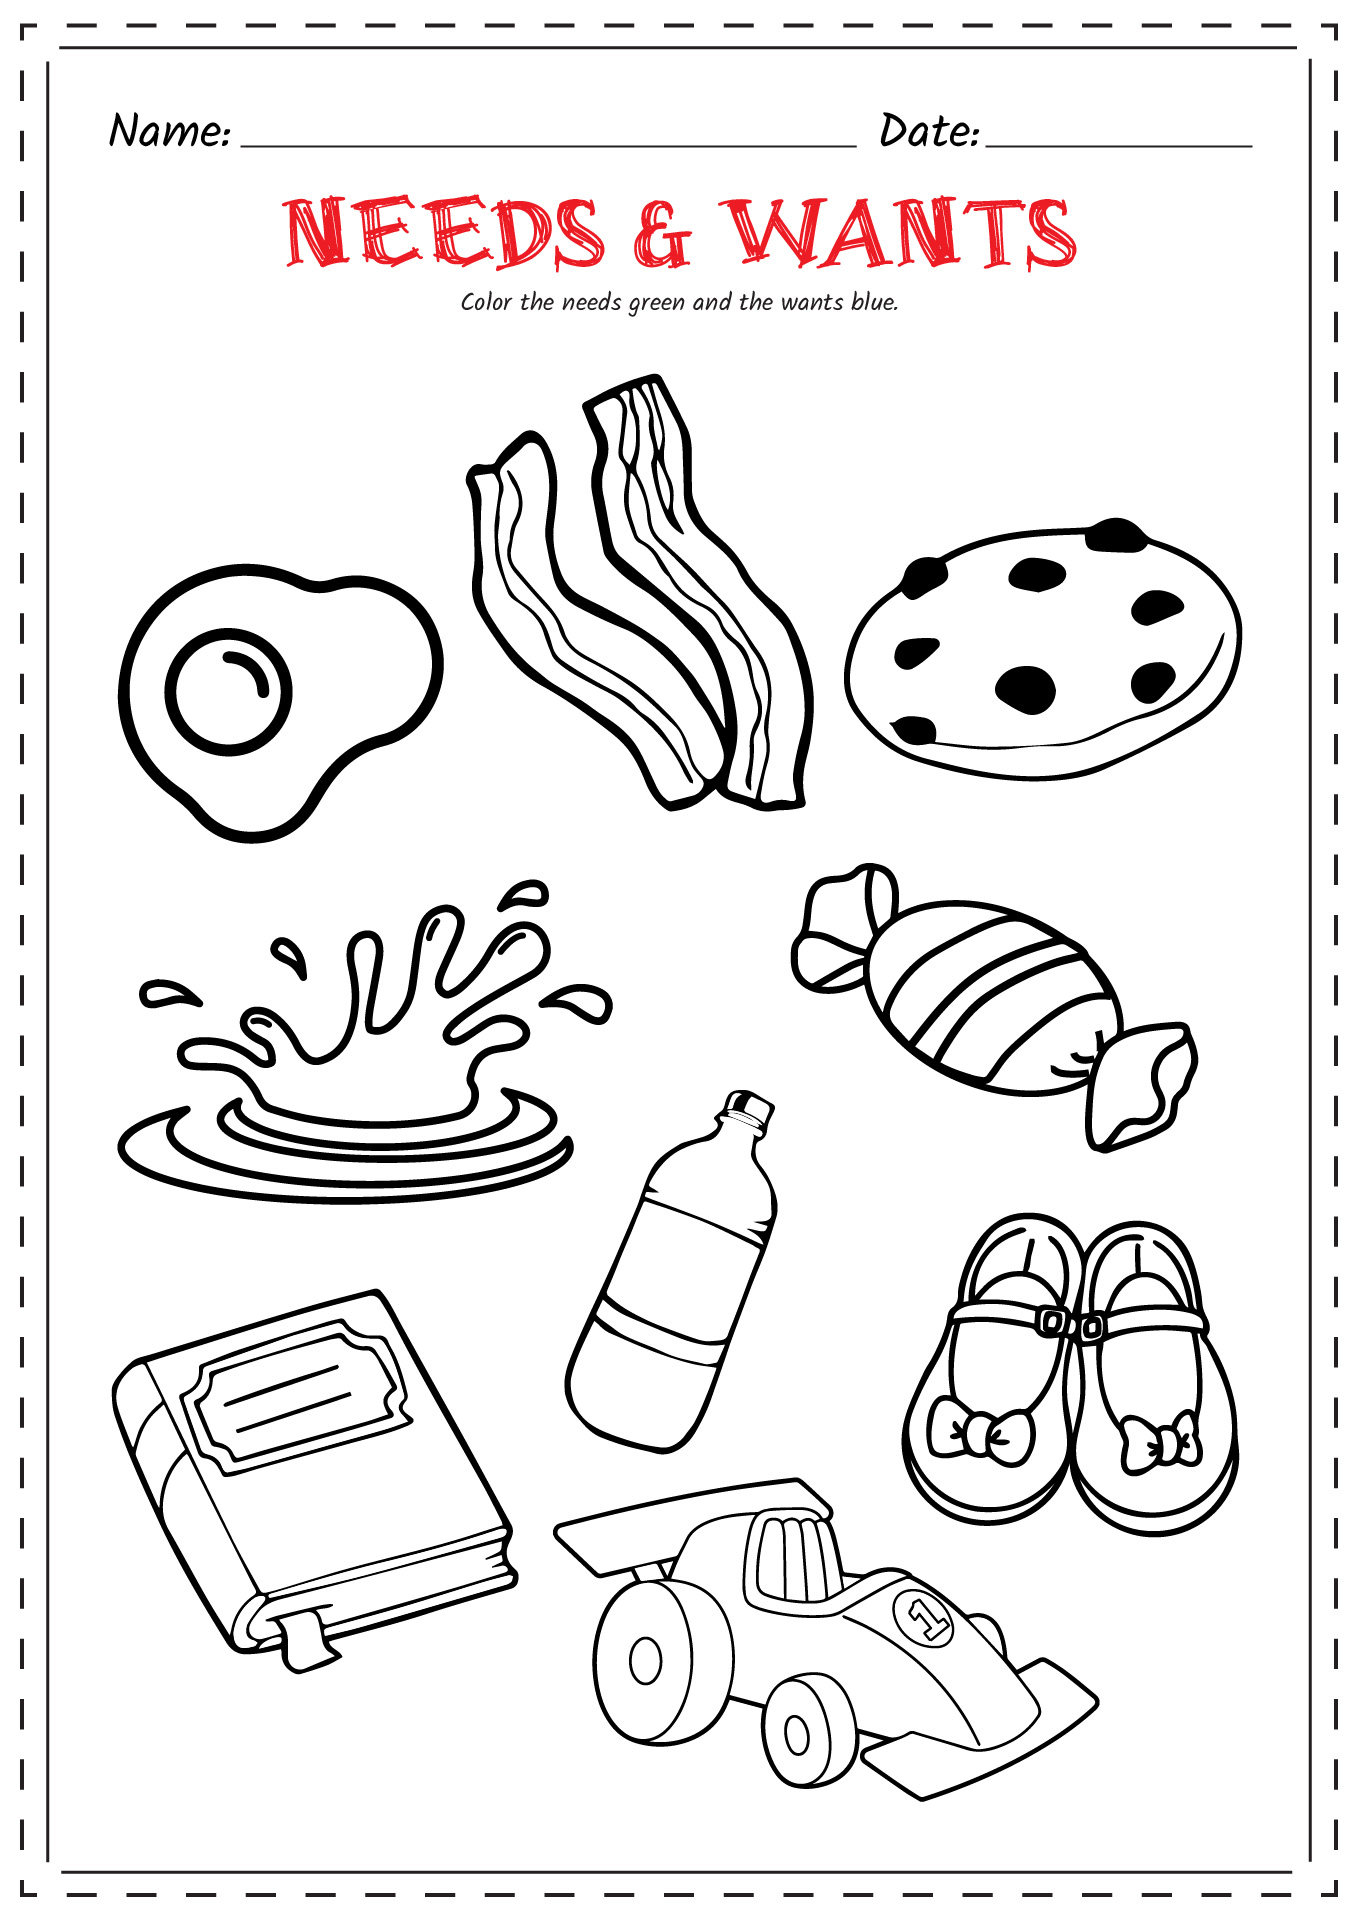 Needs and Wants Activity Worksheet